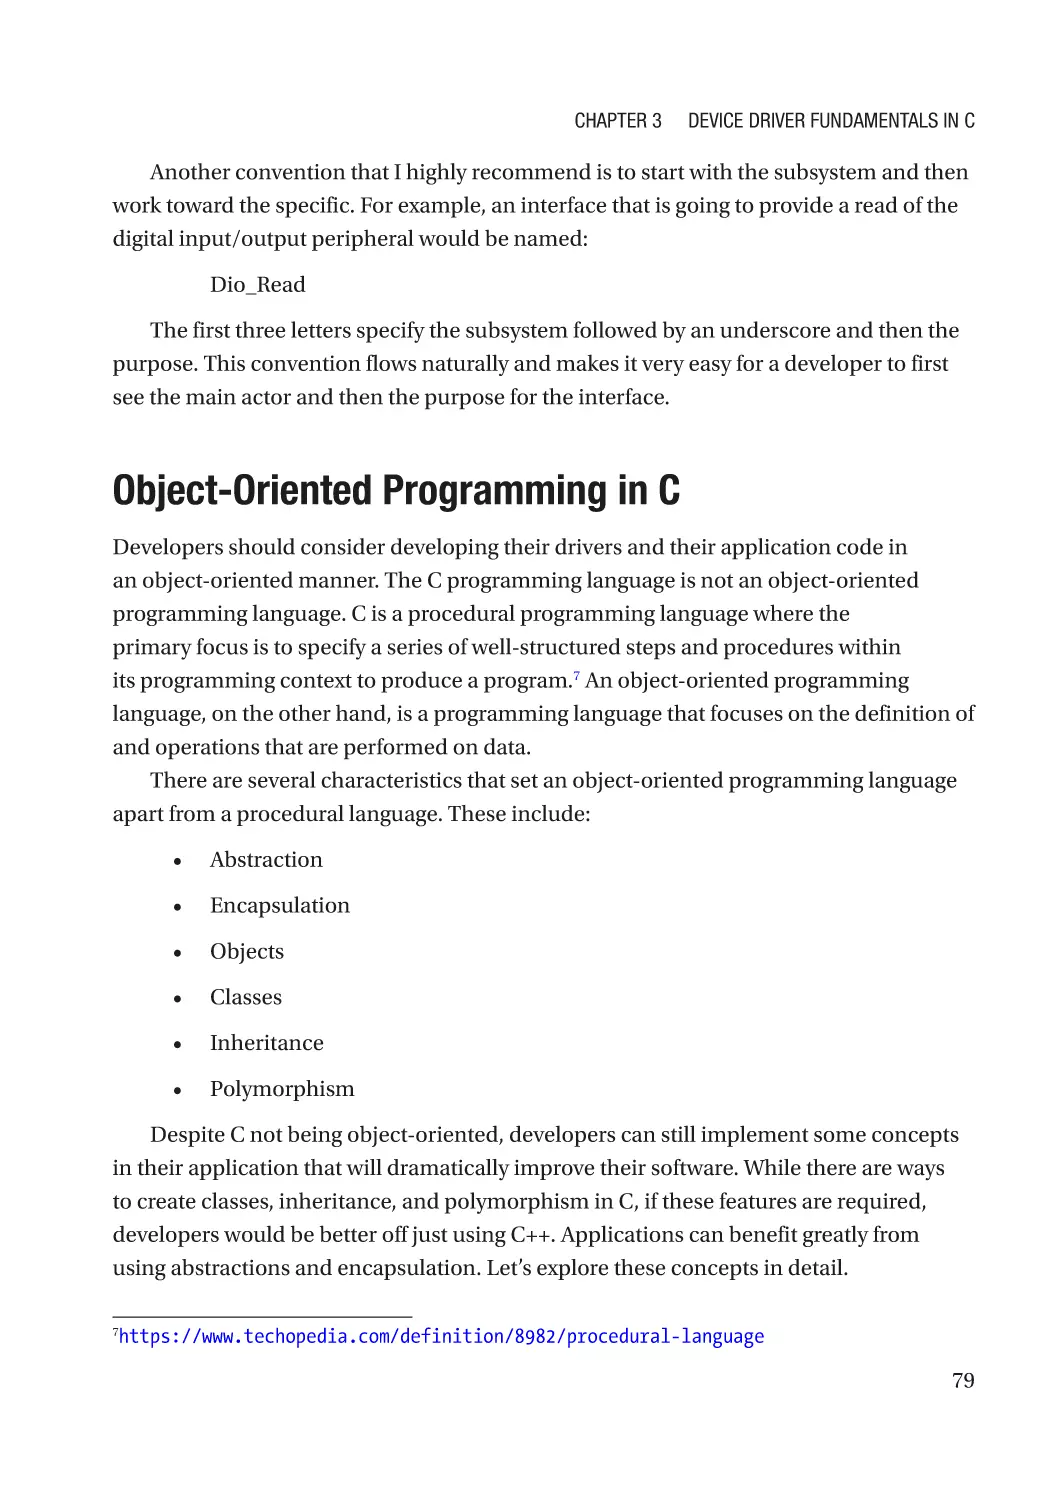 Object-Oriented Programming in C